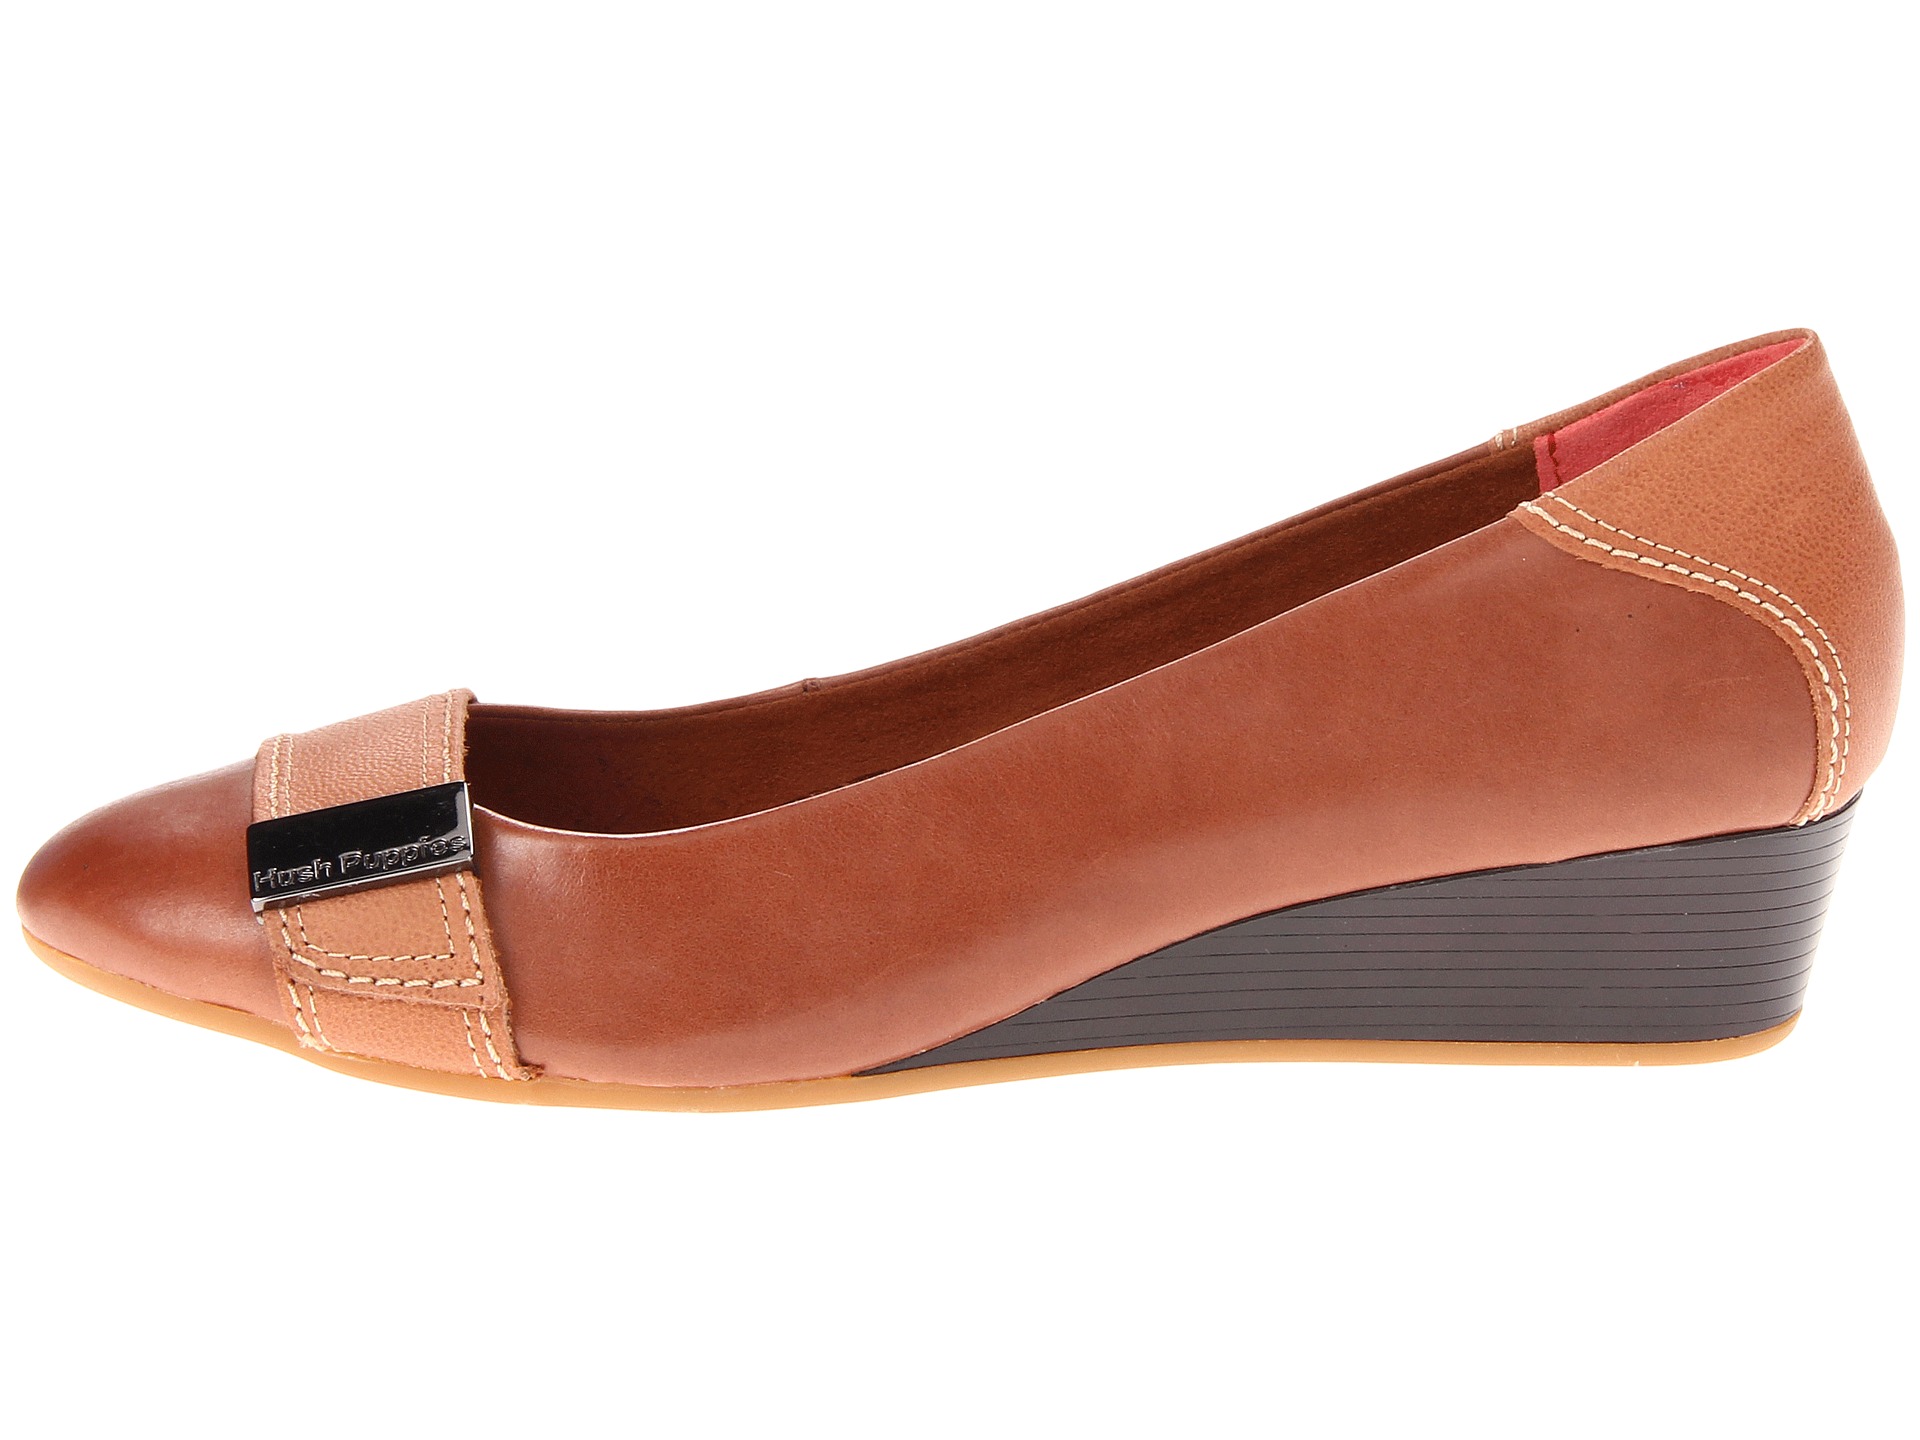 Hush Puppies Candid Pump Or, Shoes | Shipped Free at Zappos